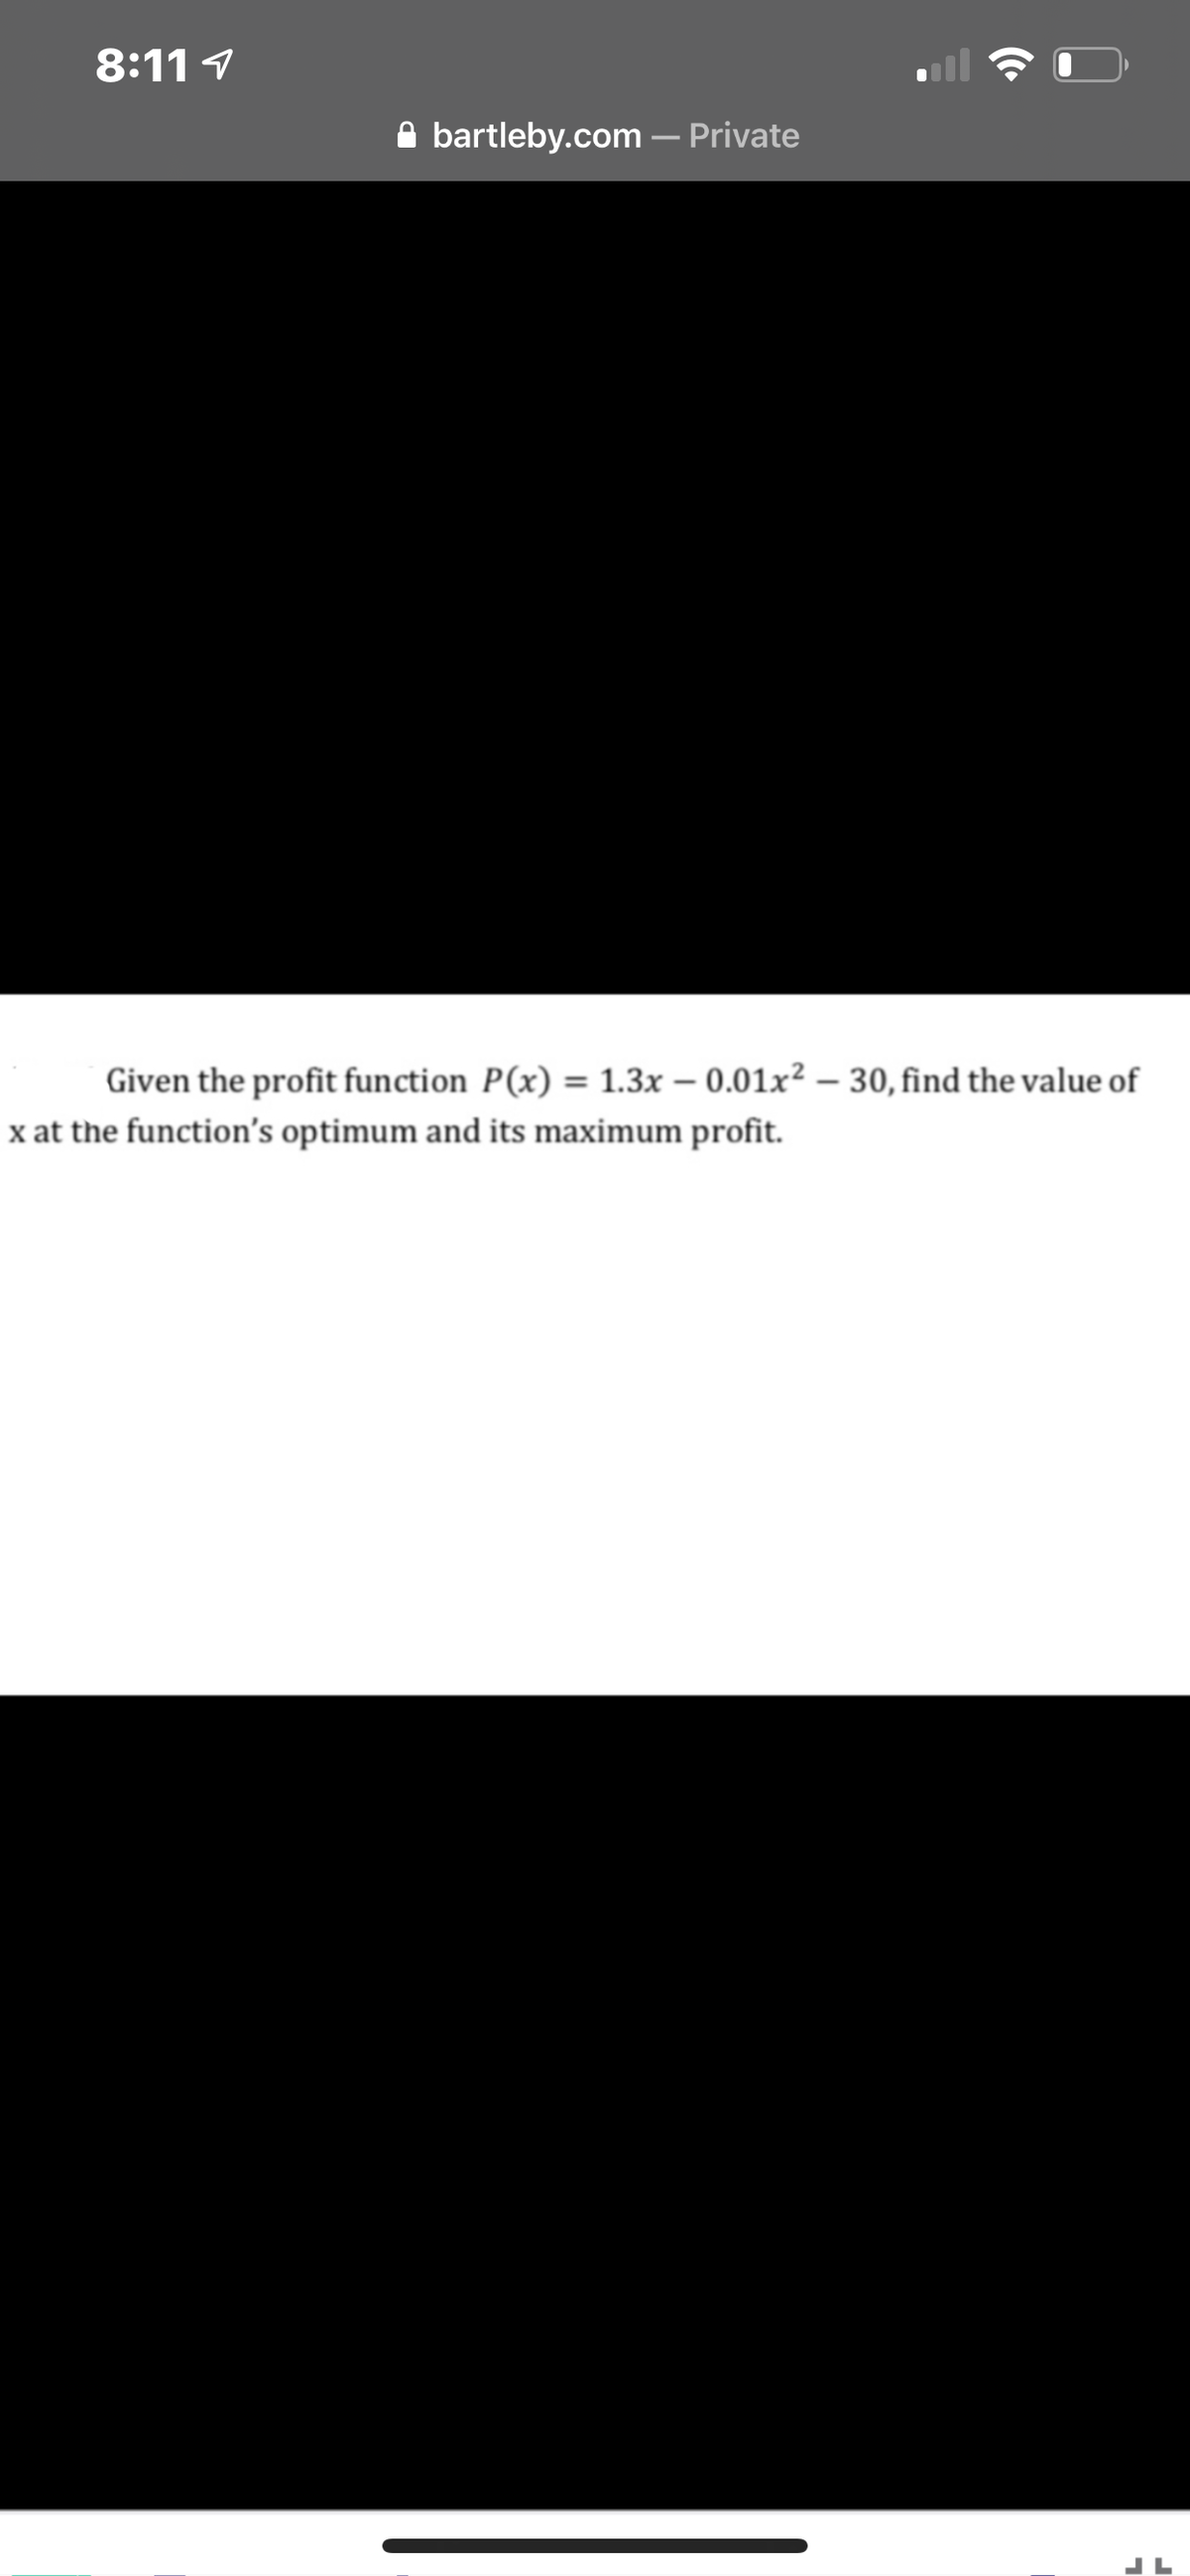 8:11 1
A bartleby.com – Private
Given the profit function P(x) = 1.3x – 0.01x² – 30, find the value of
x at the function's optimum and its maximum profit.
